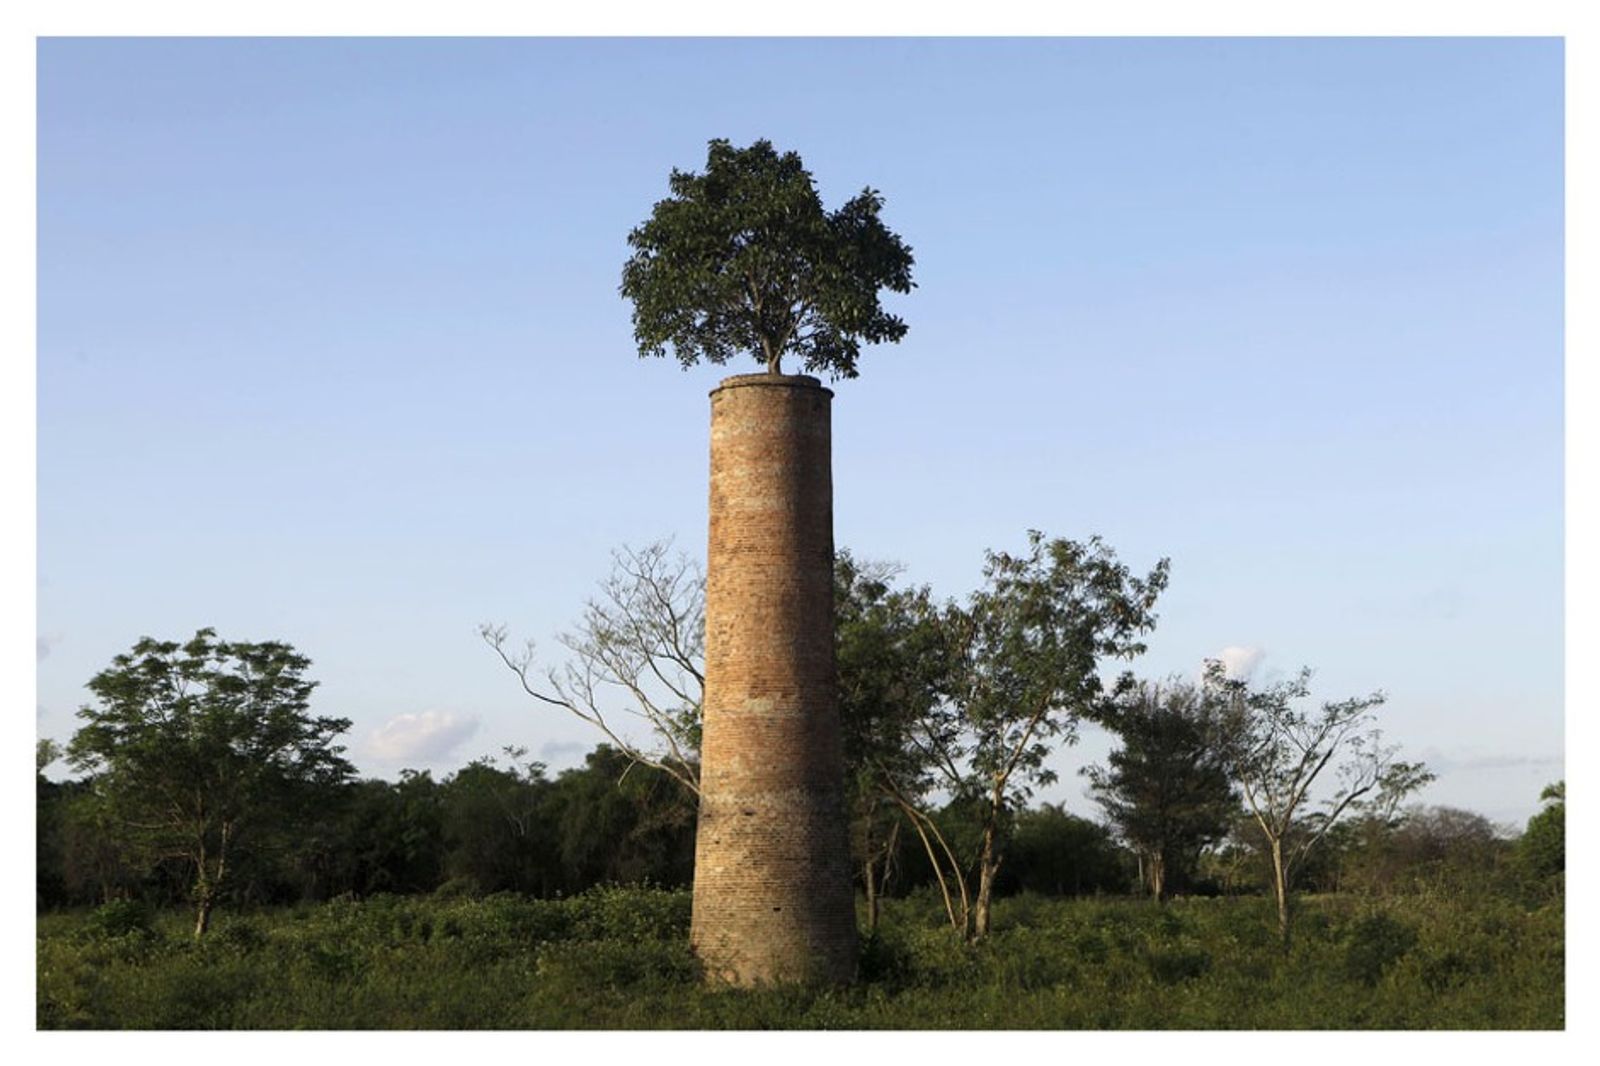 © Jorge Saenz - A three grows at the top of a chimney of an abandoned factory in Luque, Paraguay, October 2, 2011. (Jorge Saenz)